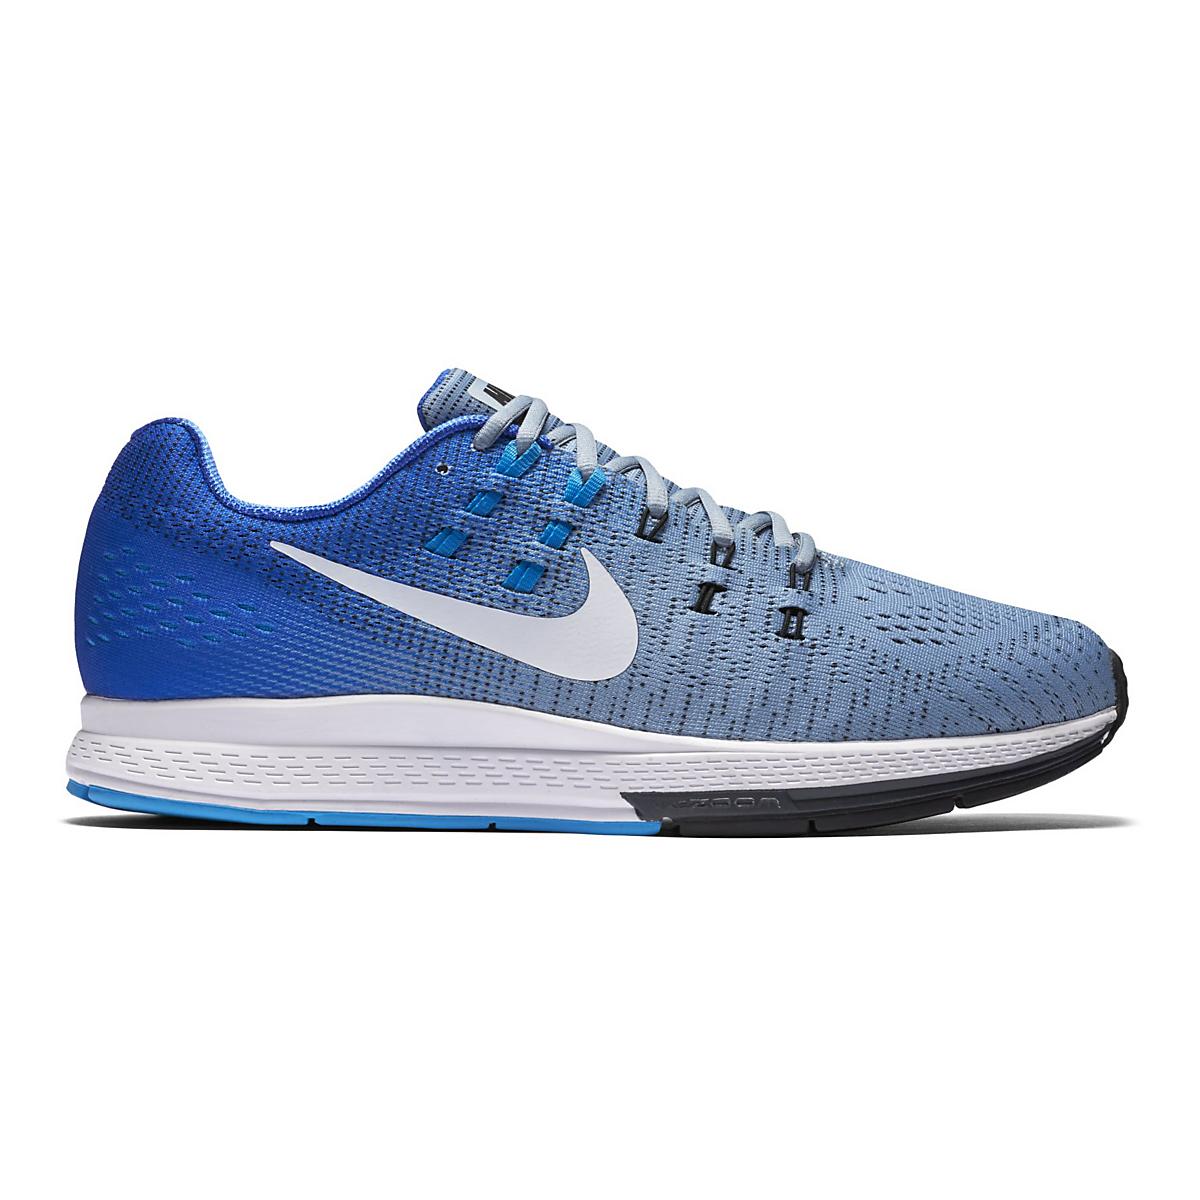 Mens Nike Air Zoom Structure 19 Running Shoe at Road Runner Sports